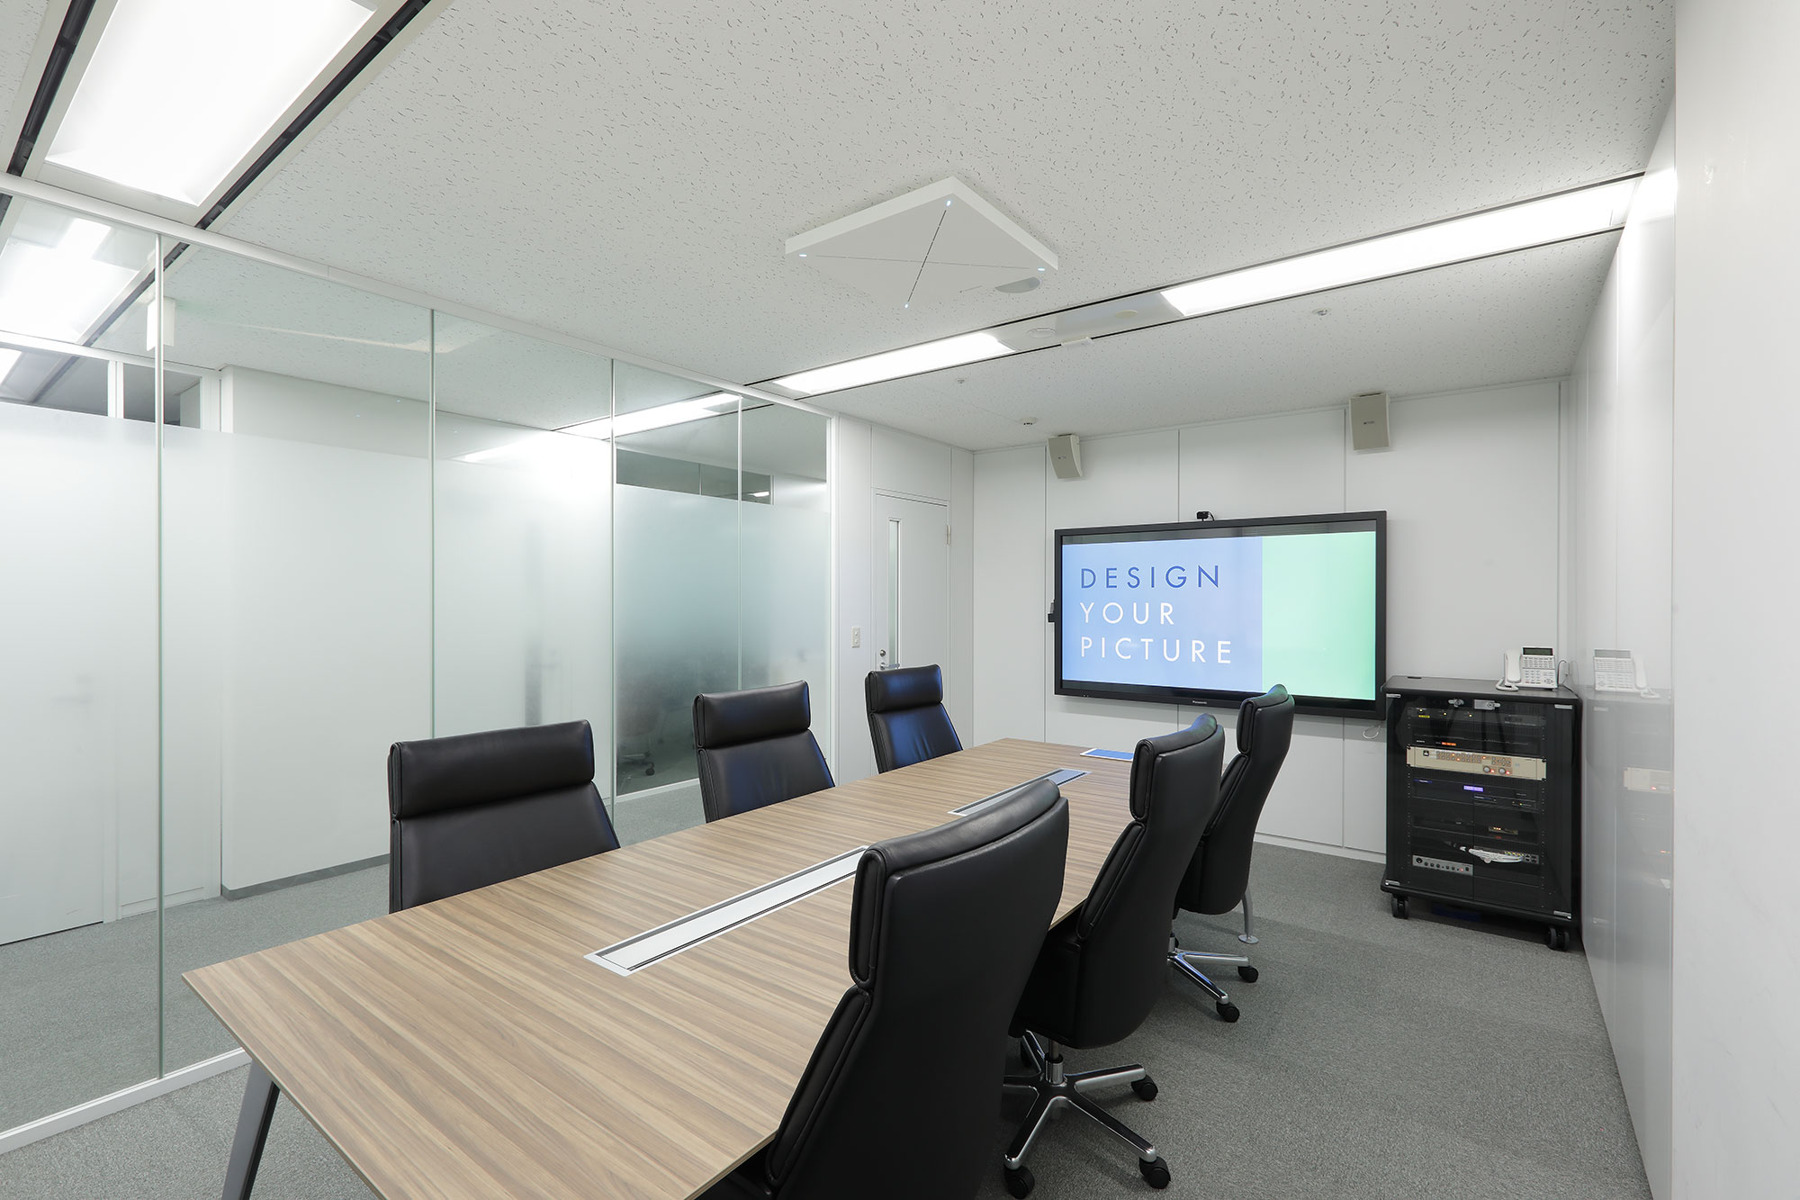 A conference room as a showroom: Interview about TeamConnect Ceiling 2 with Hideaki Tasaki and Shota Kawauchi from Mitomo